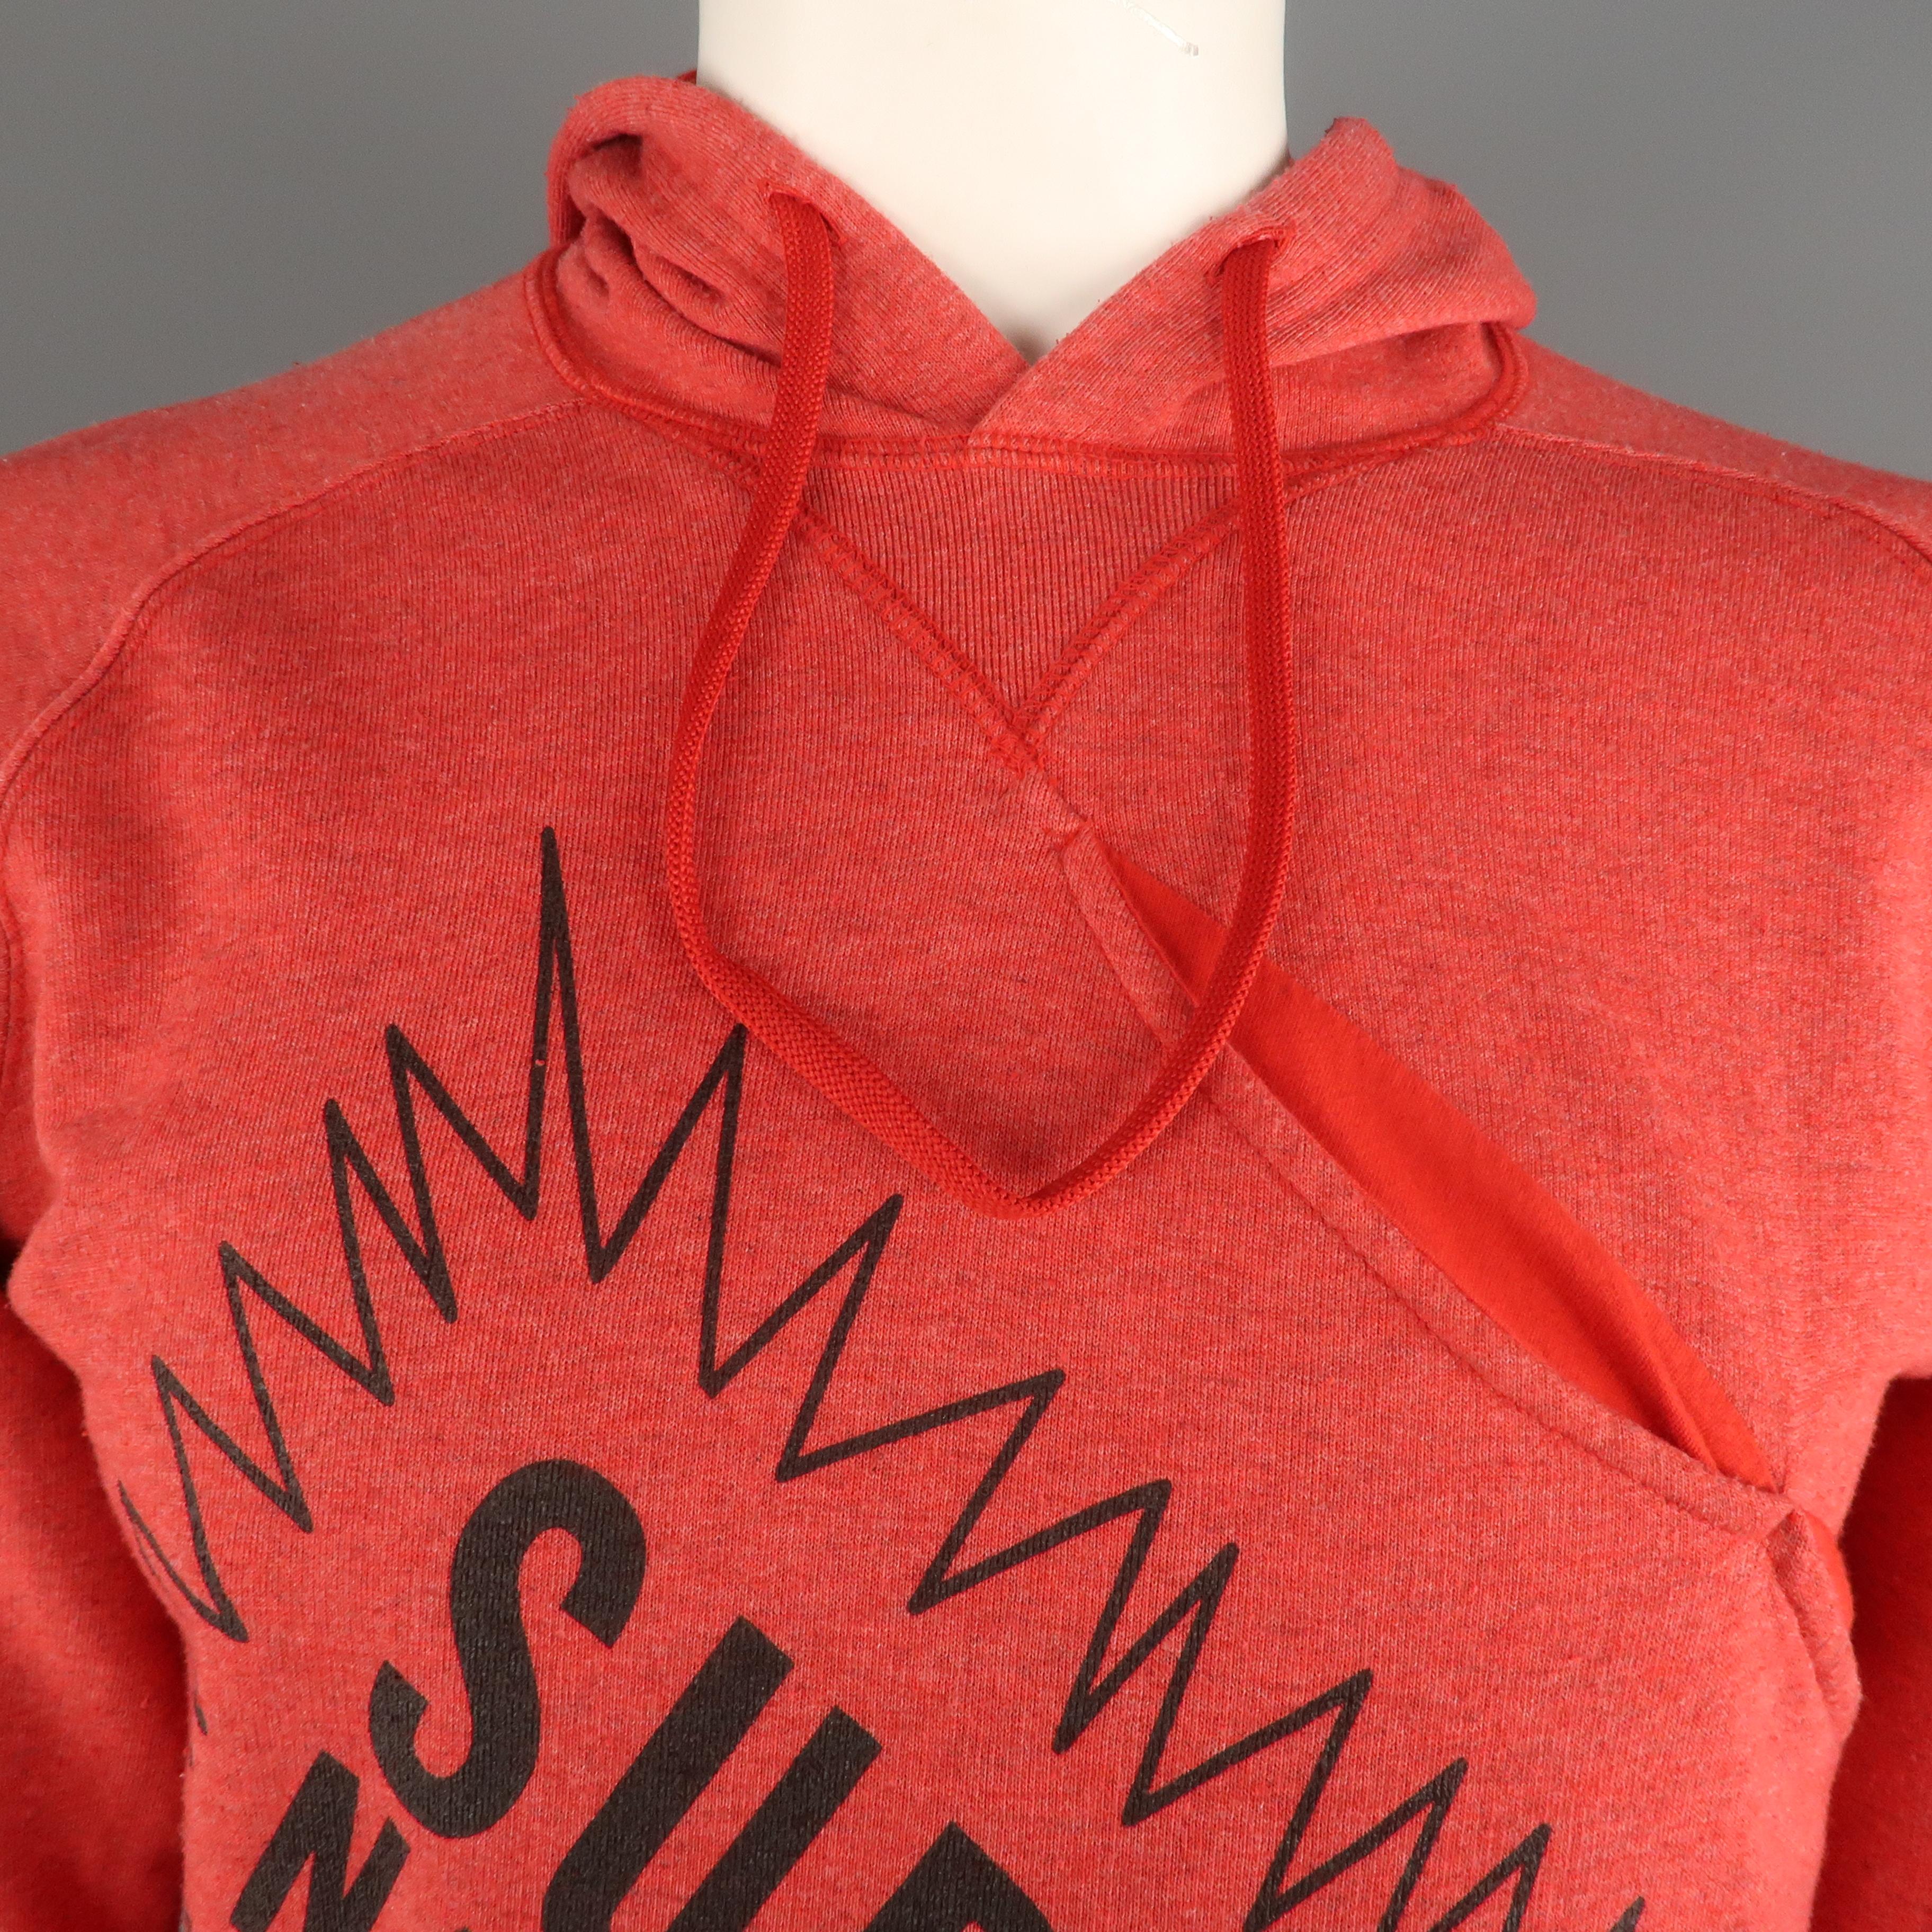 WALTER VAN BEIRENDONCK sweatshirt comes in a red cotton featuring a front 